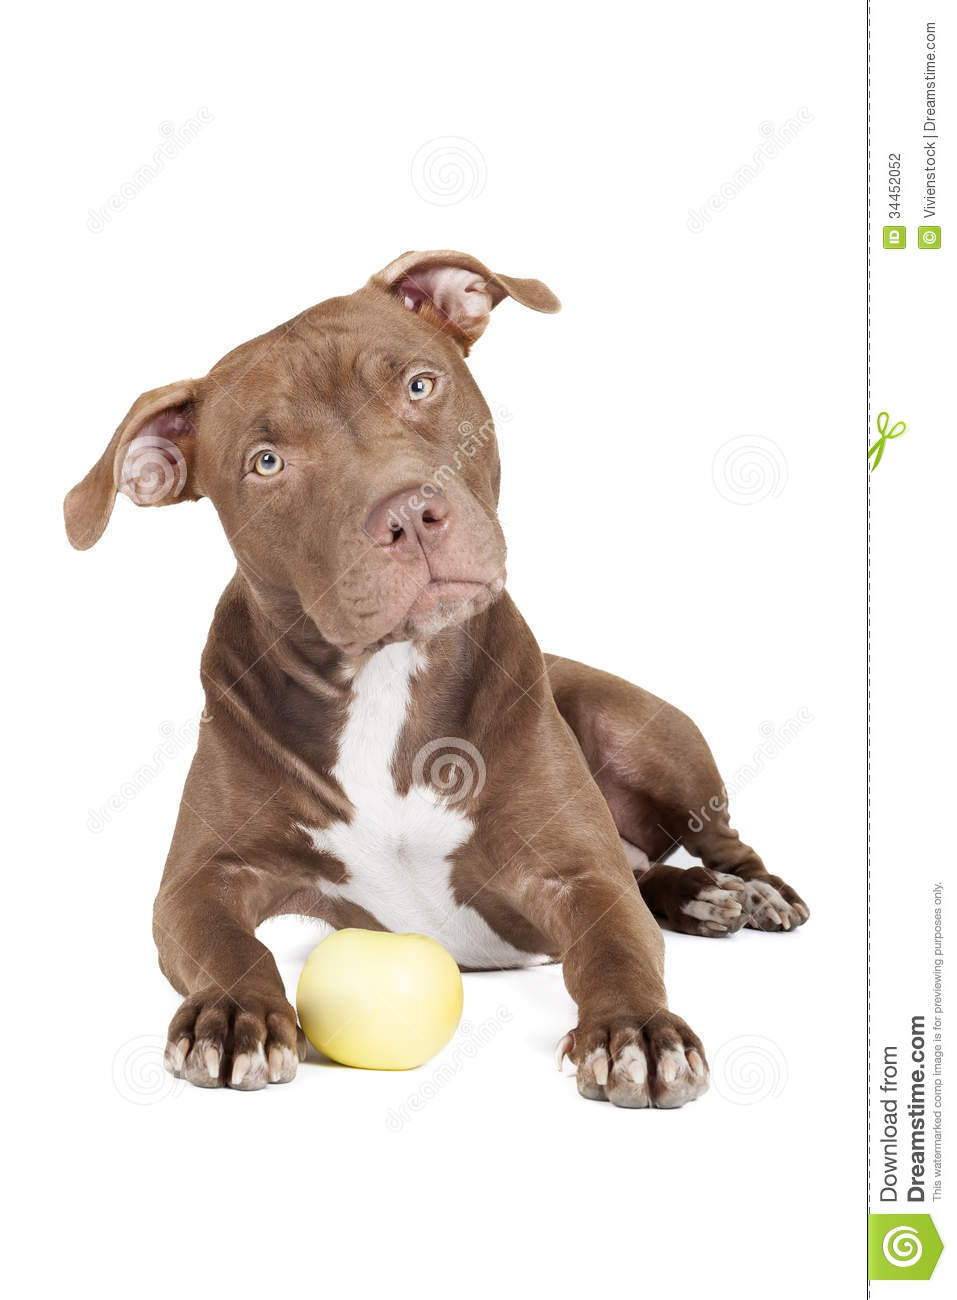 Dog Breed Pit Bull With An Apple Stock Photography   Image  34452052